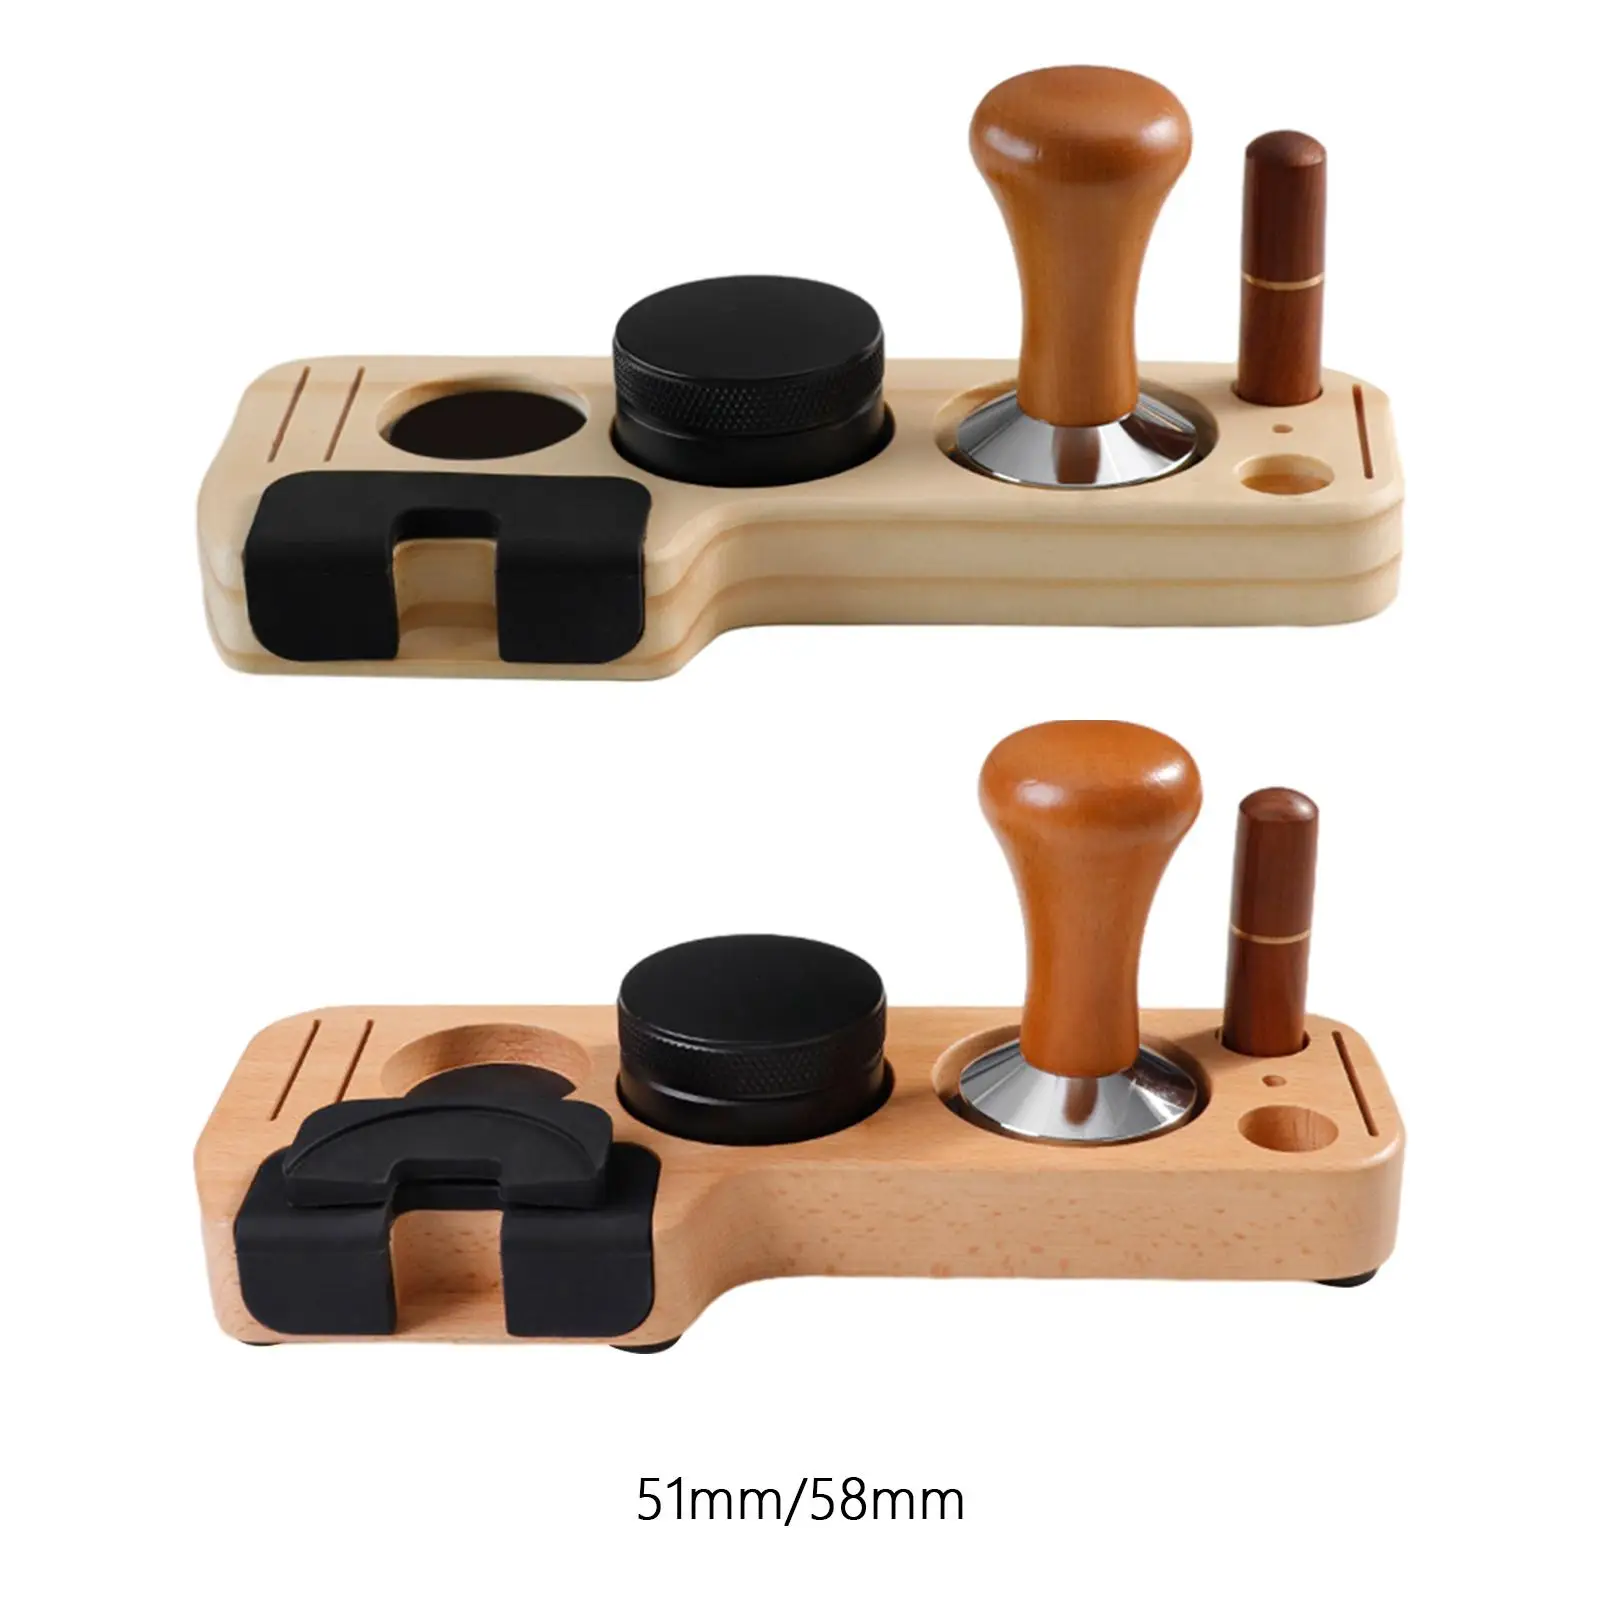 Espresso Tamping Stand Set Barista Part Multipurpose Espresso Accessories Kits for Counters Tearoom Worktop Cafes Coffee Bar